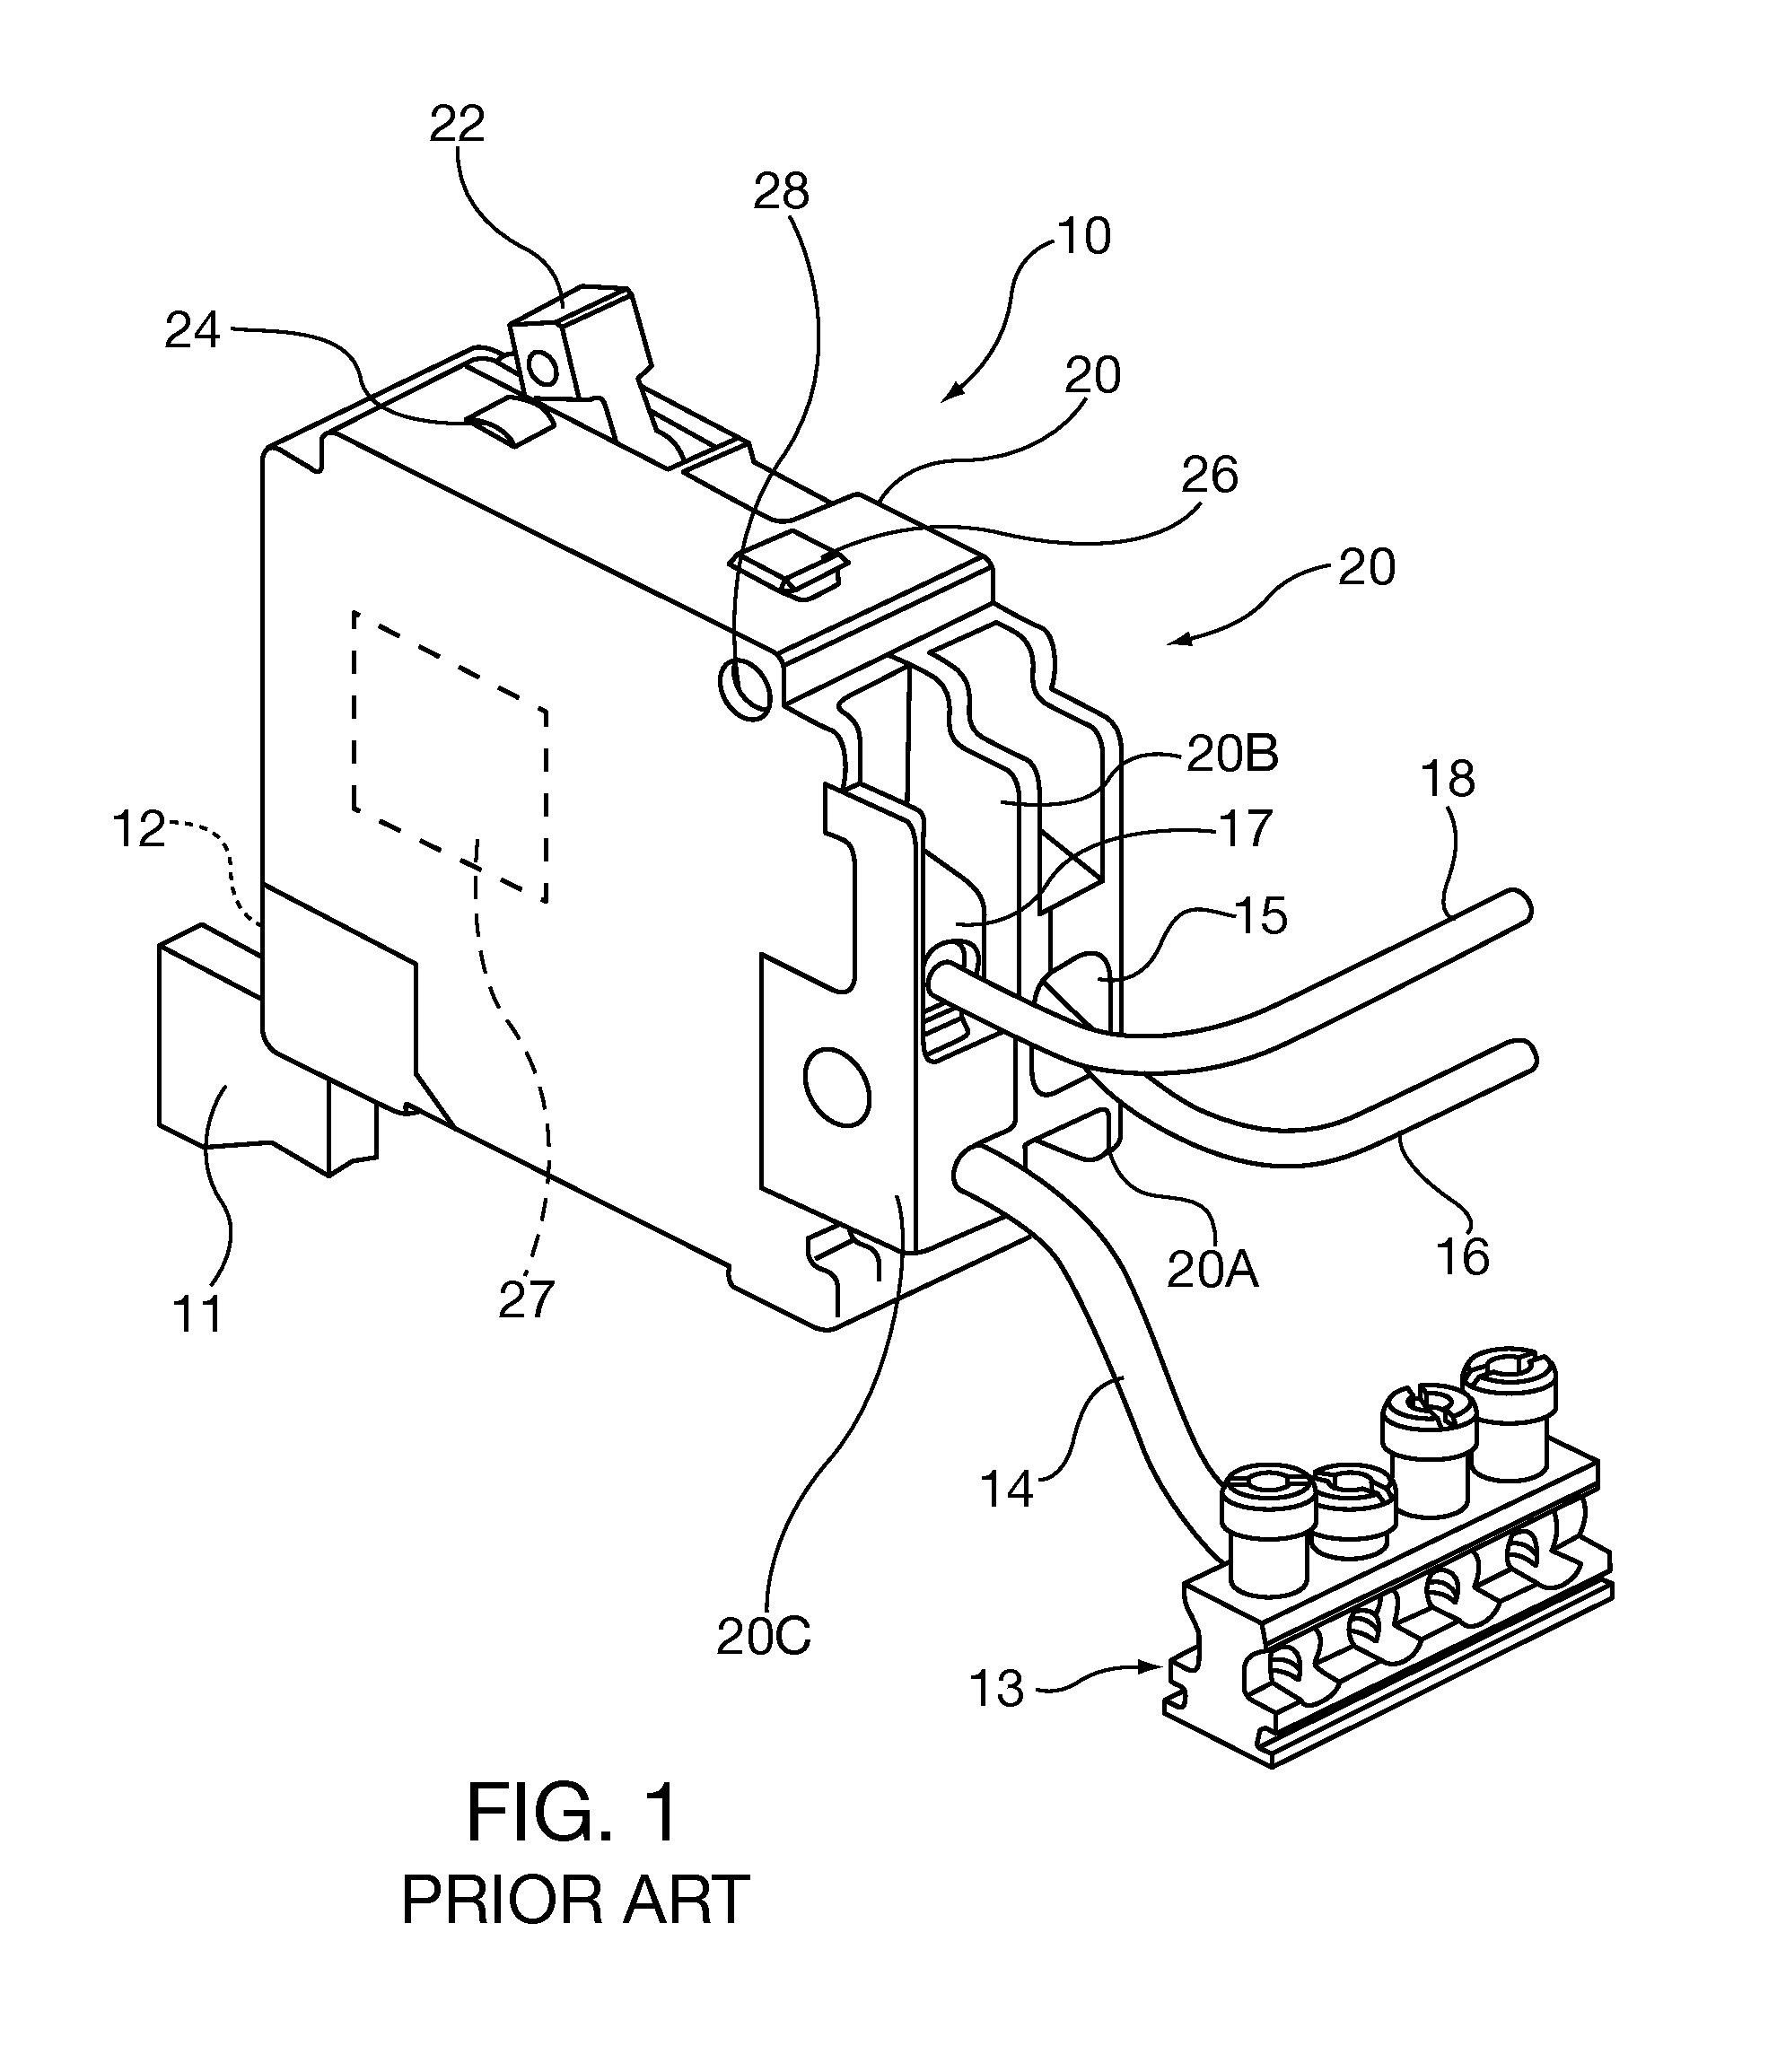 Electromagnet Assembly Directly Driving Latch Of An Electronic Circuit Breaker